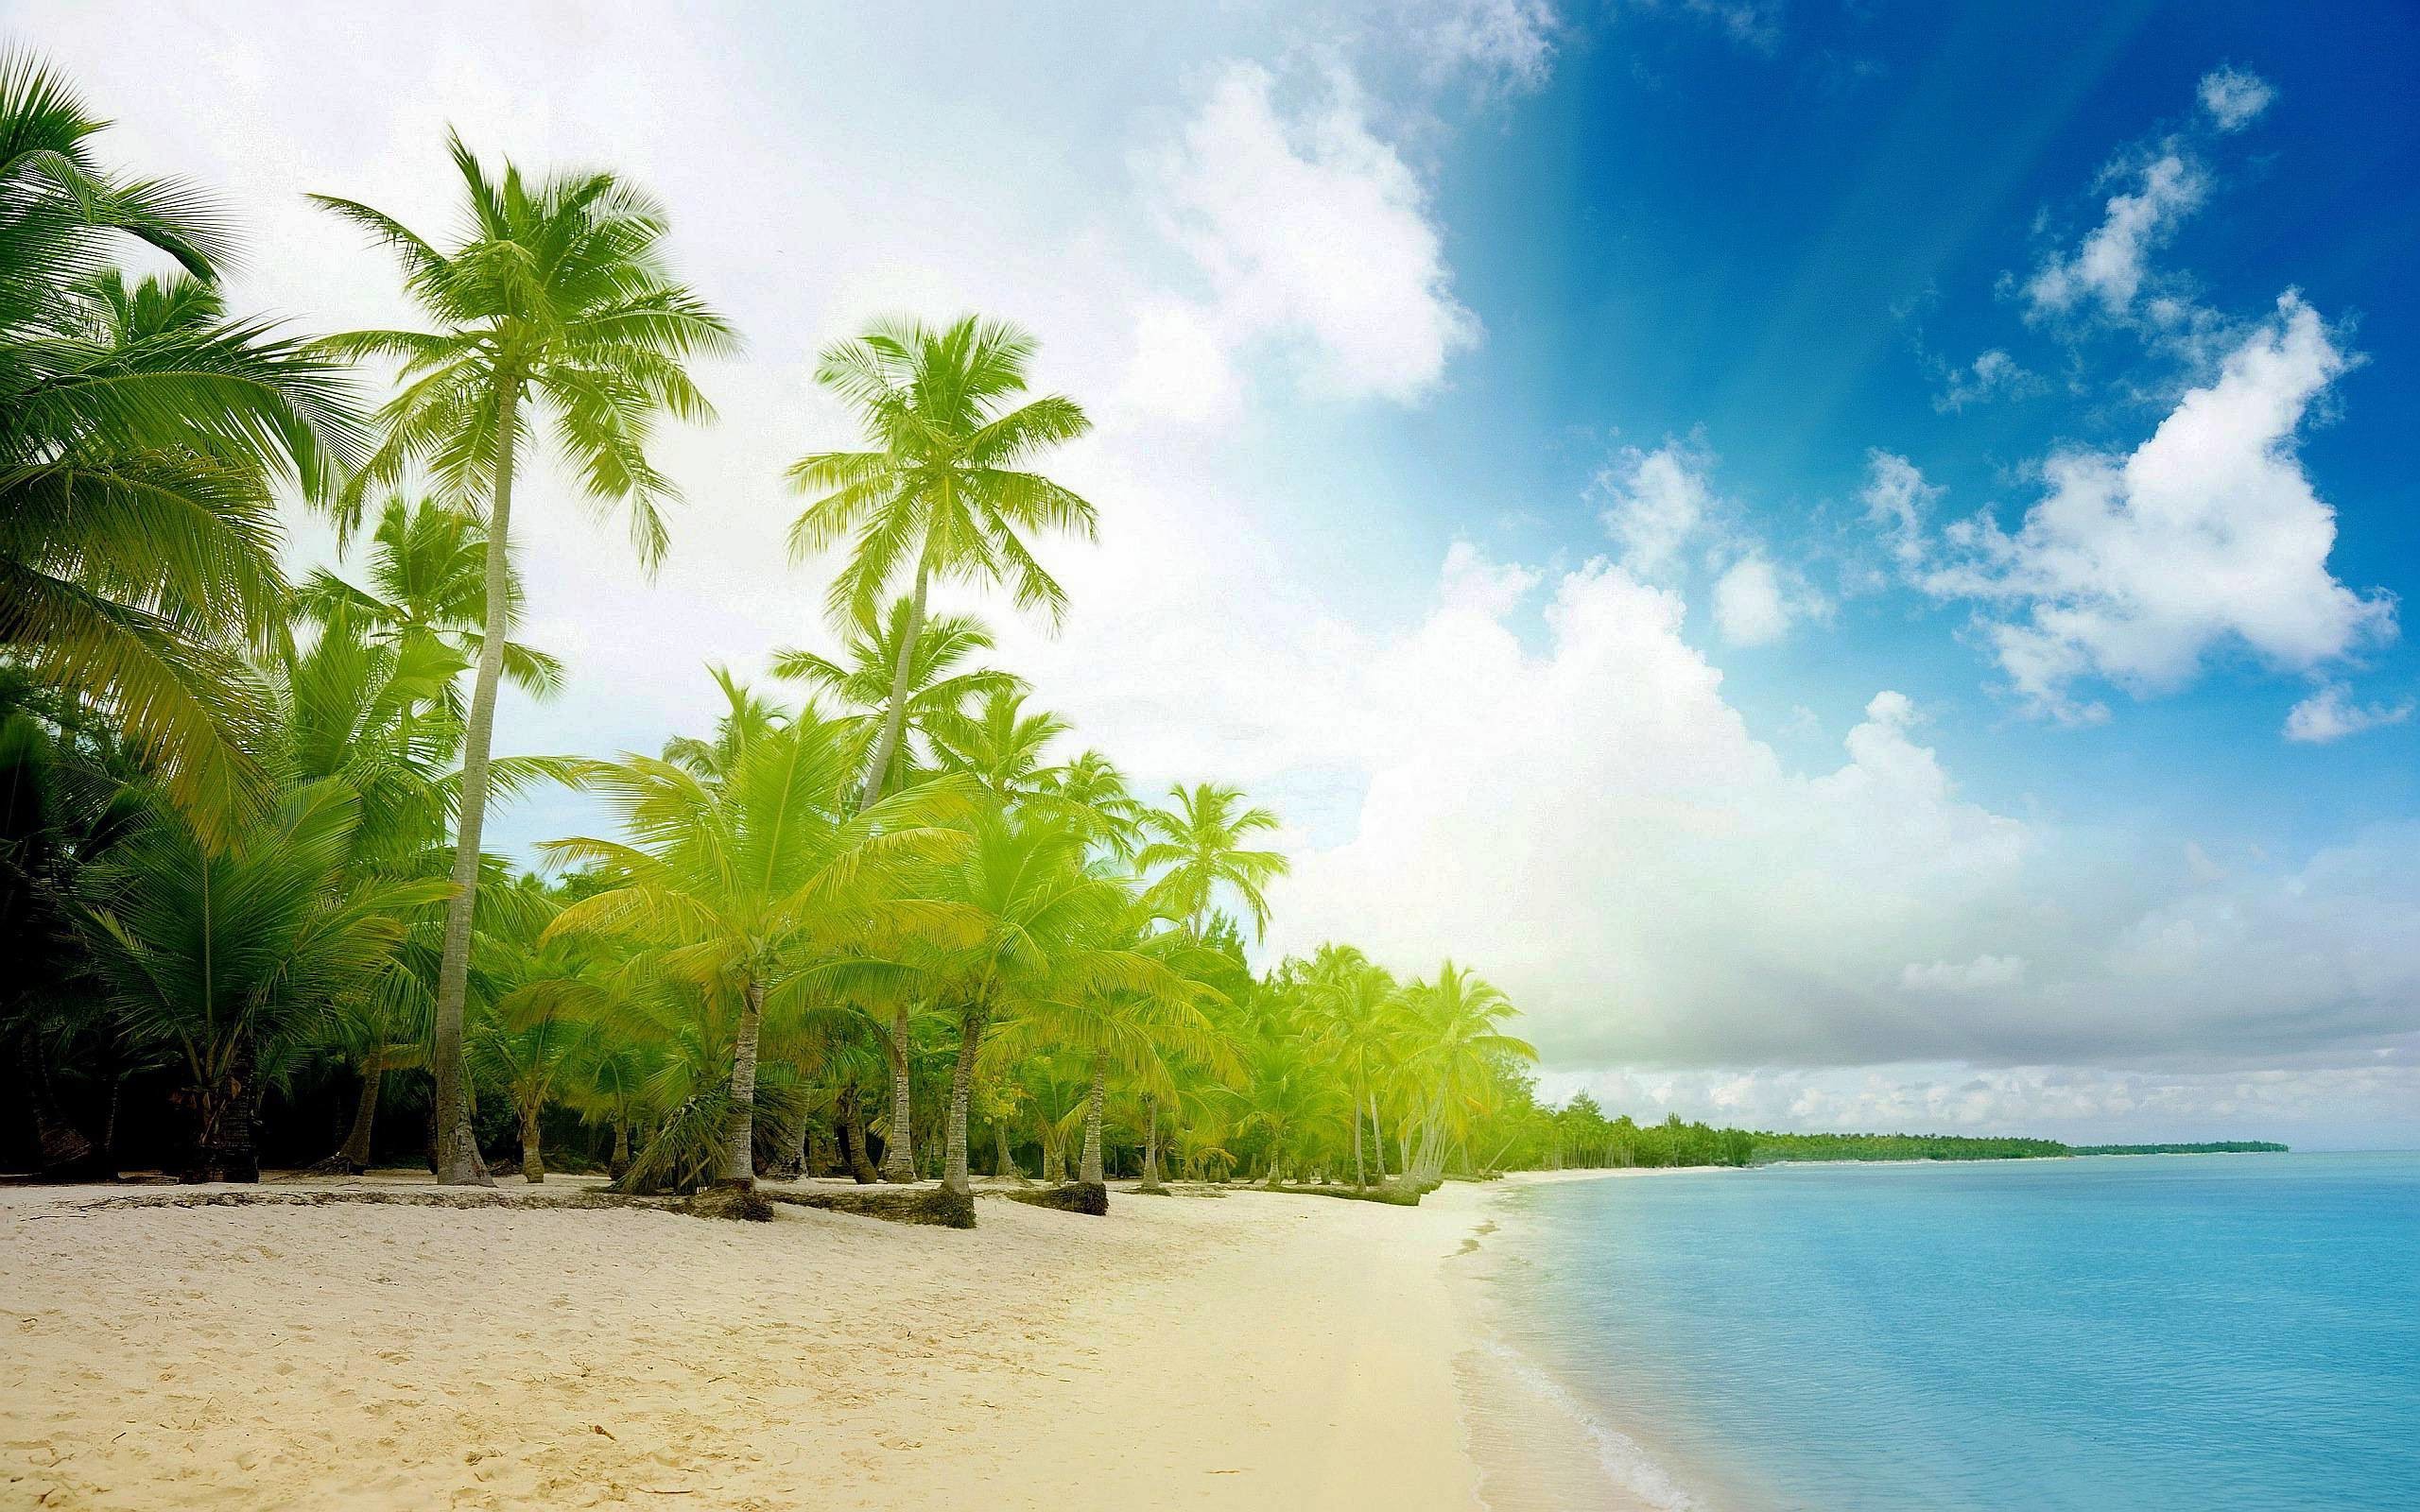 Exotic Beaches Wallpapers Hd 1080P 12 HD Wallpapers aladdino